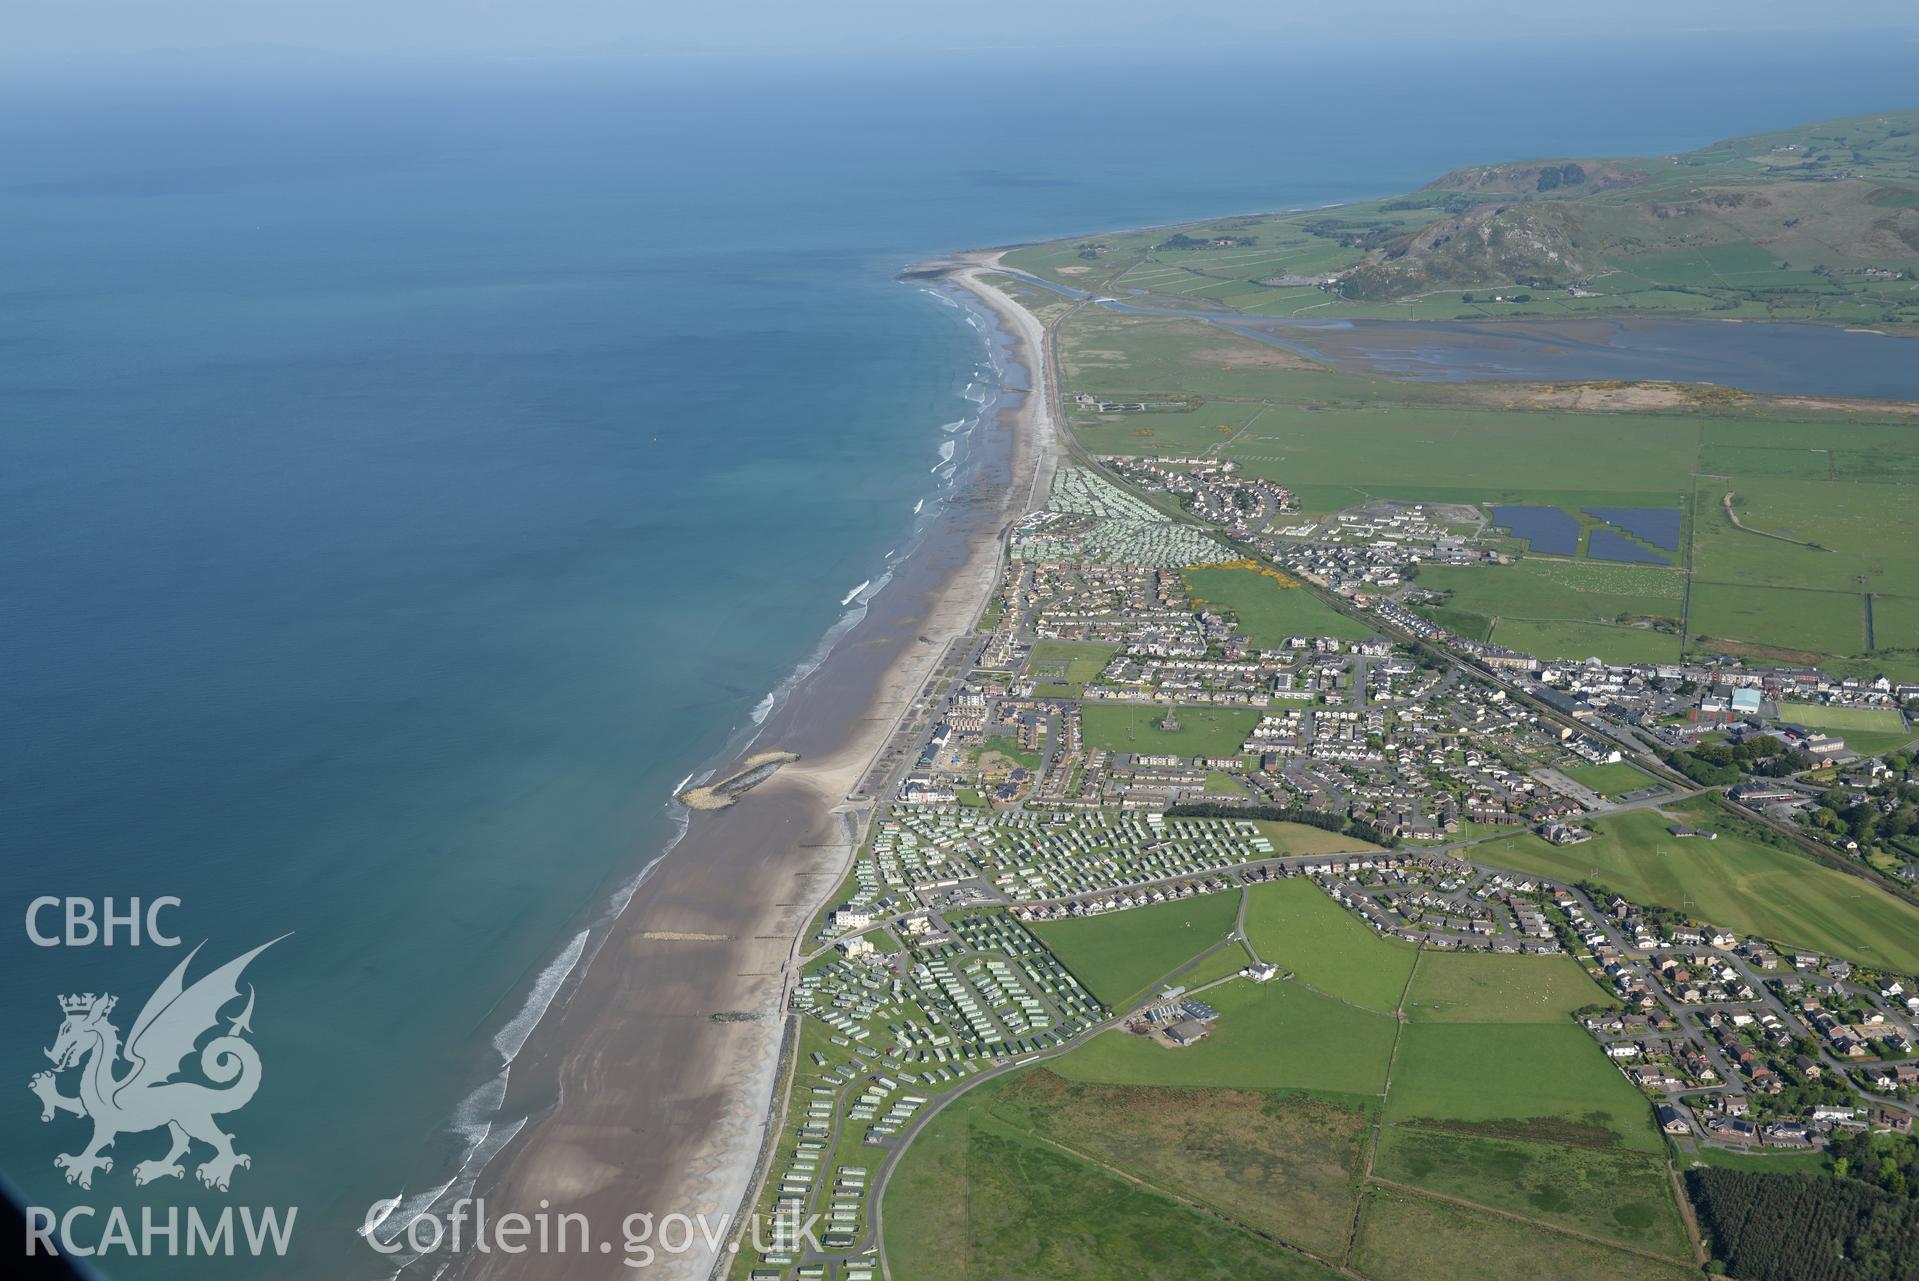 Aerial photography of Tywyn taken on 3rd May 2017.  Baseline aerial reconnaissance survey for the CHERISH Project. ? Crown: CHERISH PROJECT 2017. Produced with EU funds through the Ireland Wales Co-operation Programme 2014-2020. All material made freely available through the Open Government Licence.